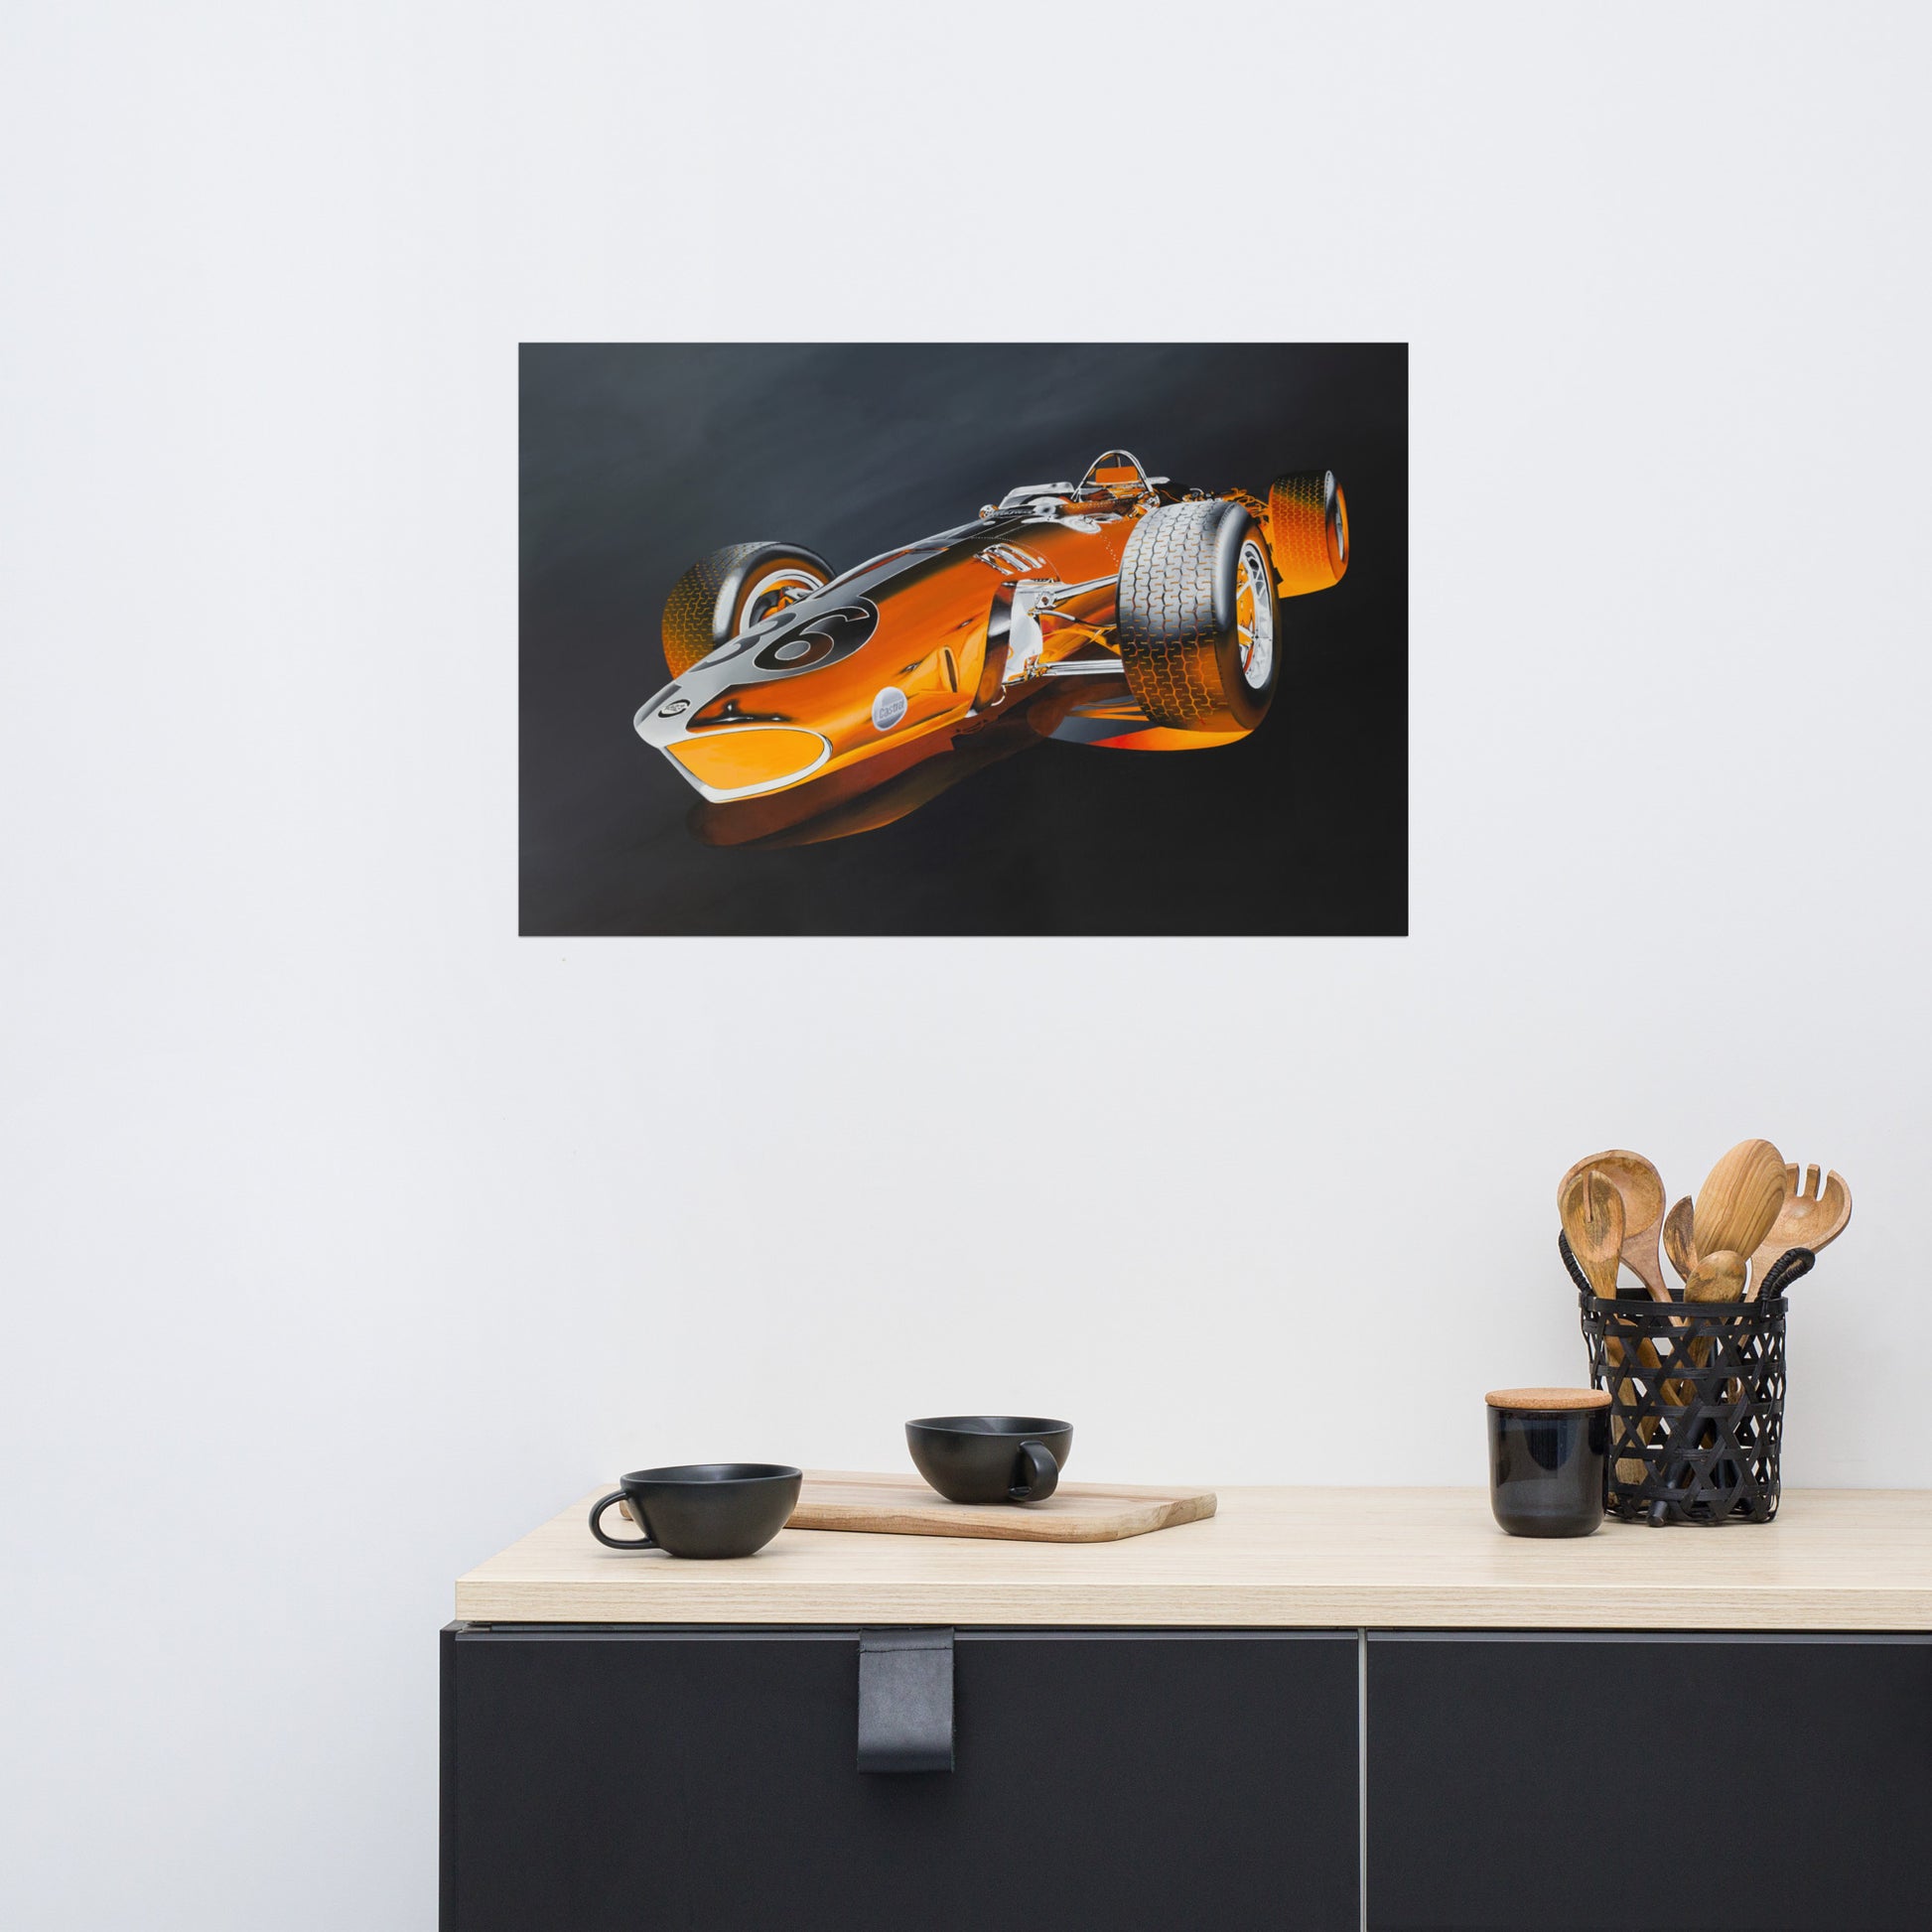 Custom orange version of the iconic Formula One car driven by Dan Gurney. High quality reproduction from original acrylic painting.